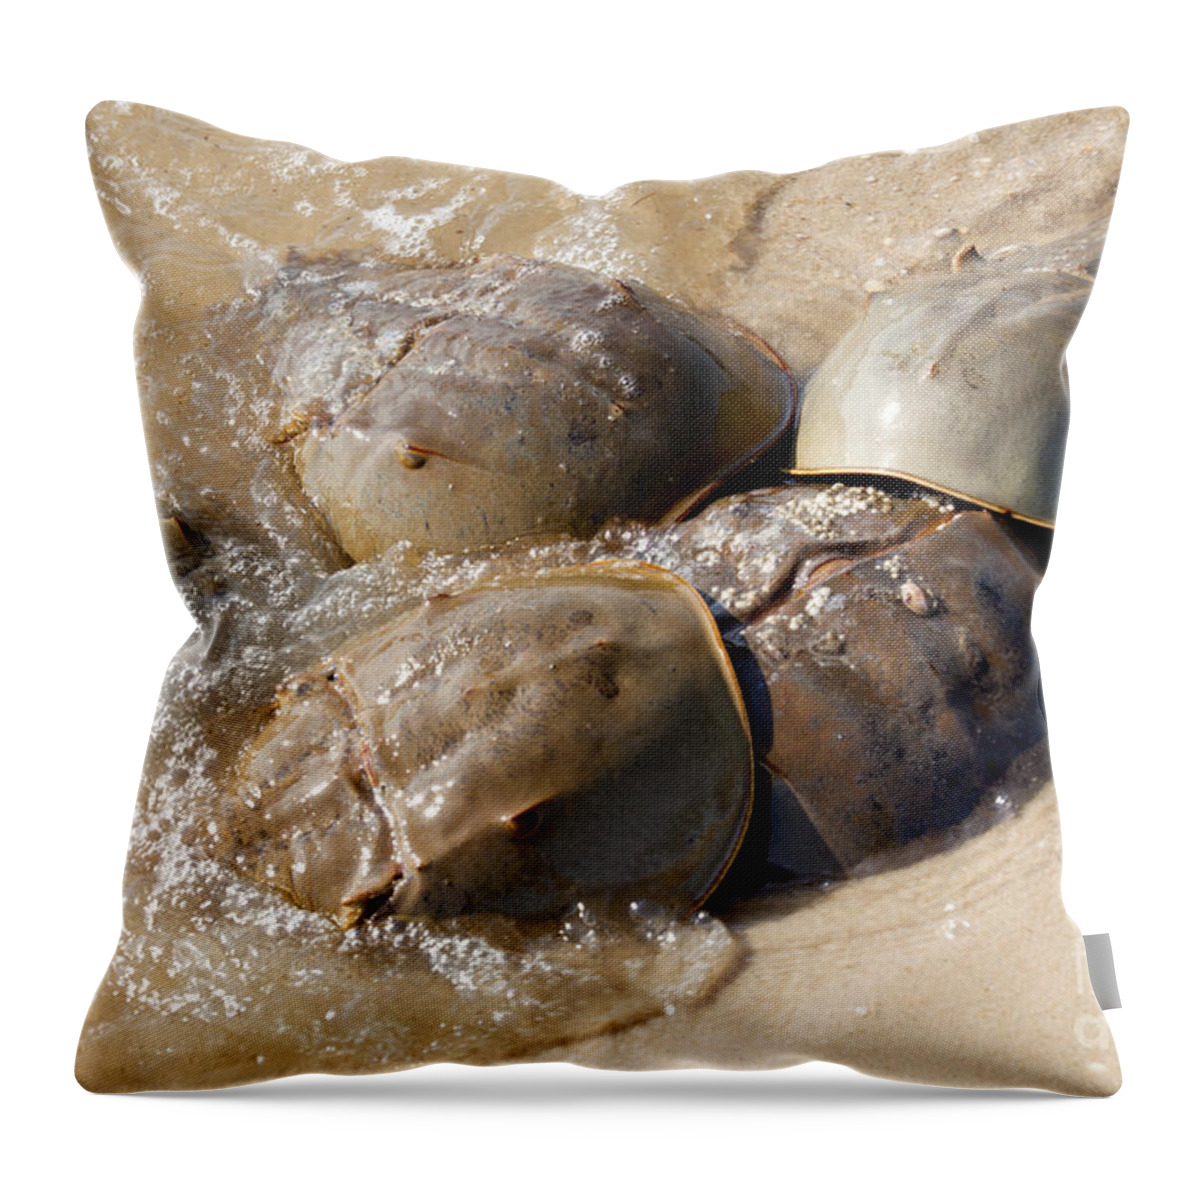 Horseshoe Crab Throw Pillow featuring the photograph Horseshoe Crab - Limulus polyphemus #3 by Anthony Totah